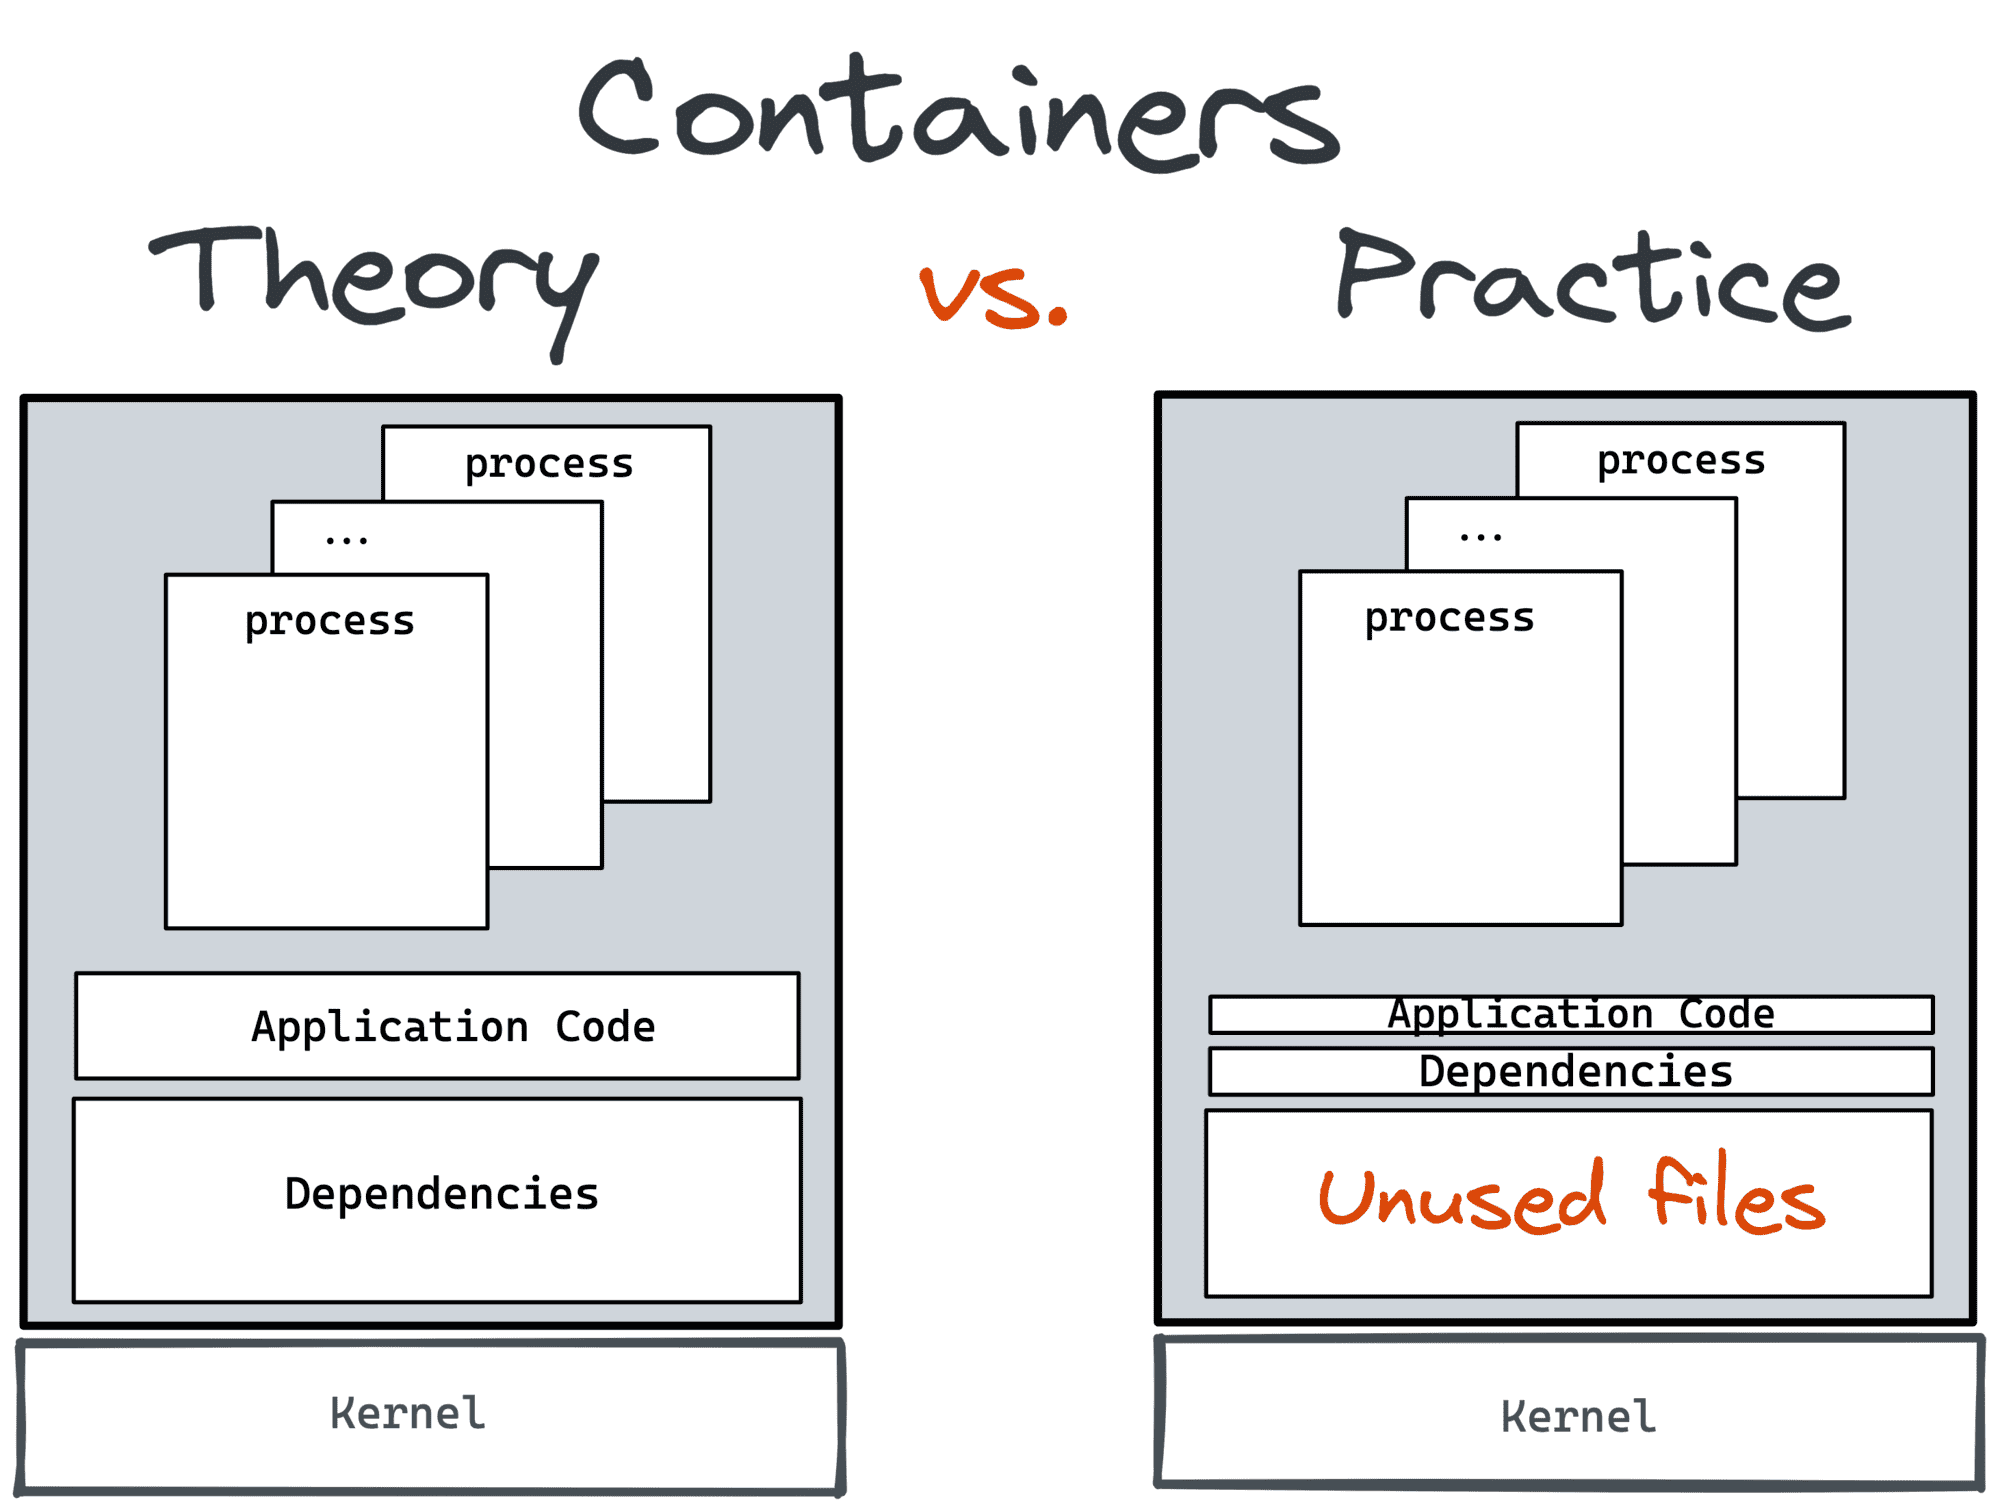 Containers - theory vs. practice.